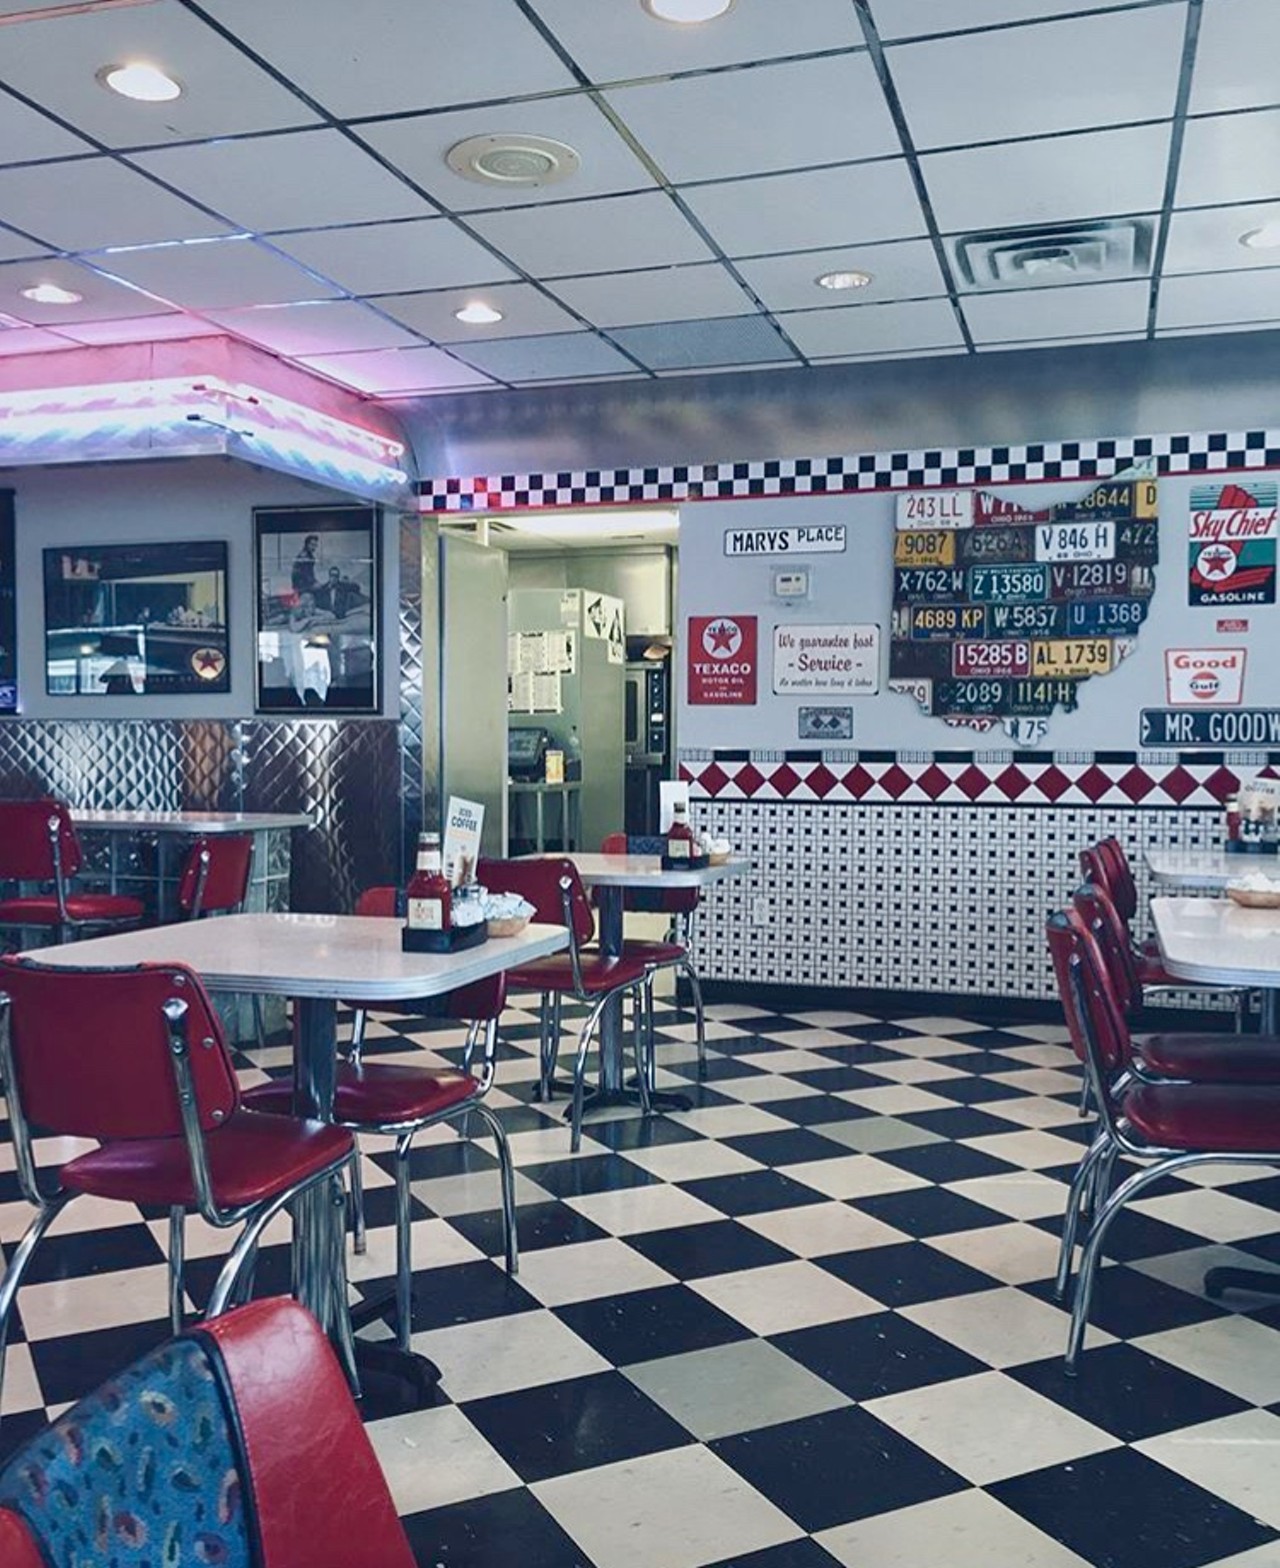 Mary&#146;s Diner
666 E. Main St, Geneva
Travel back to the past with this retro '50s style diner. All of your classic diner food can be found here, from pancakes to apple pie to whipped milkshakes. With decor that celebrates Ohio and a "simpler time," this place is certainly full of charm. 
Photo via Marusya.99/Instagram